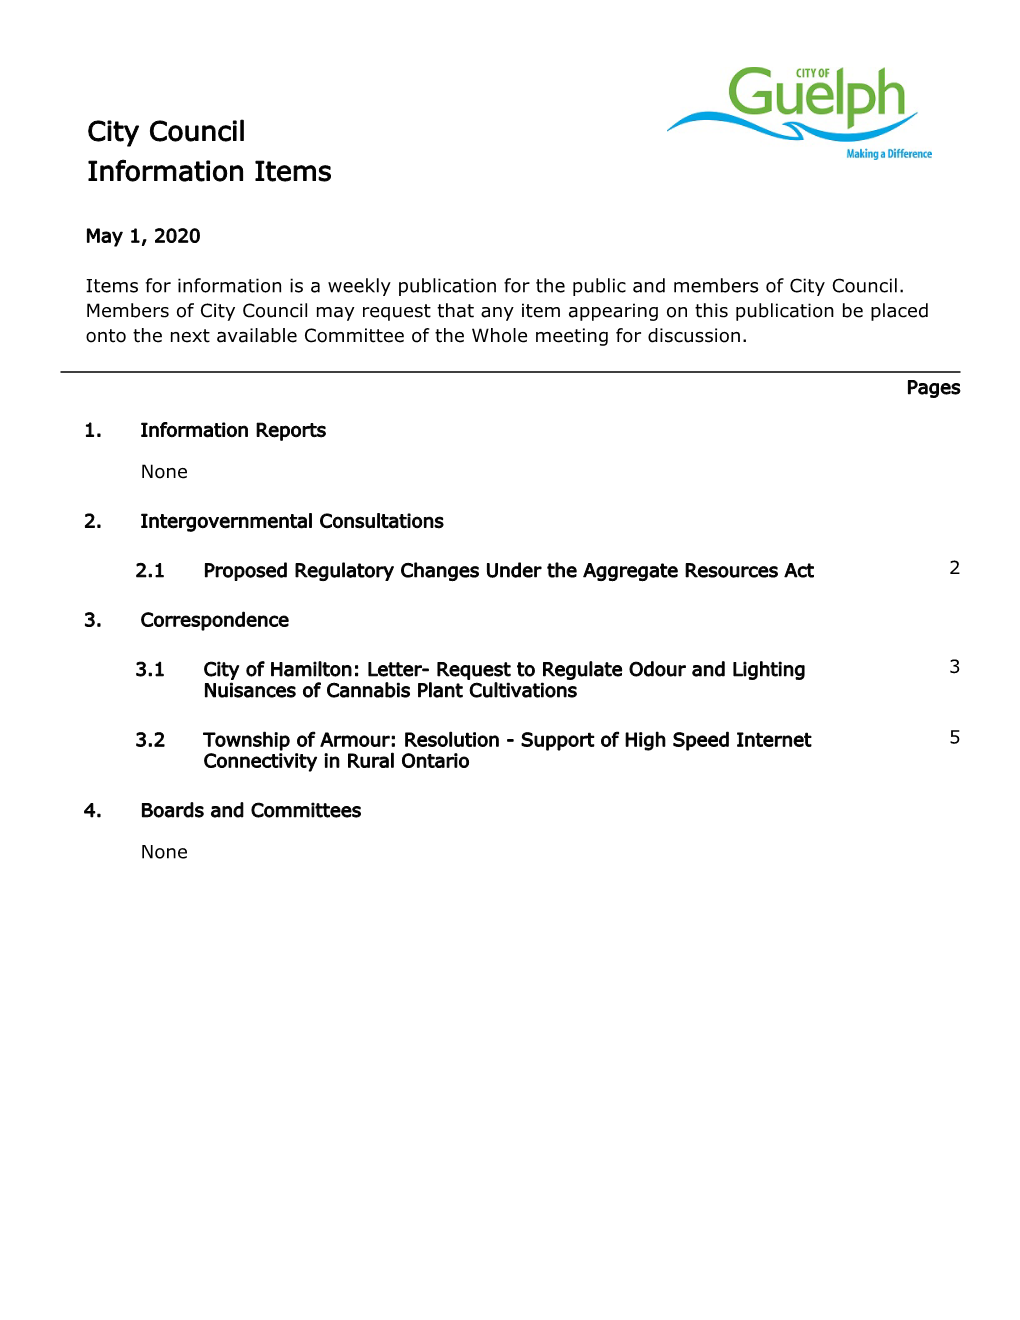 Items for Information Is a Weekly Publication for the Public and Members of City Council